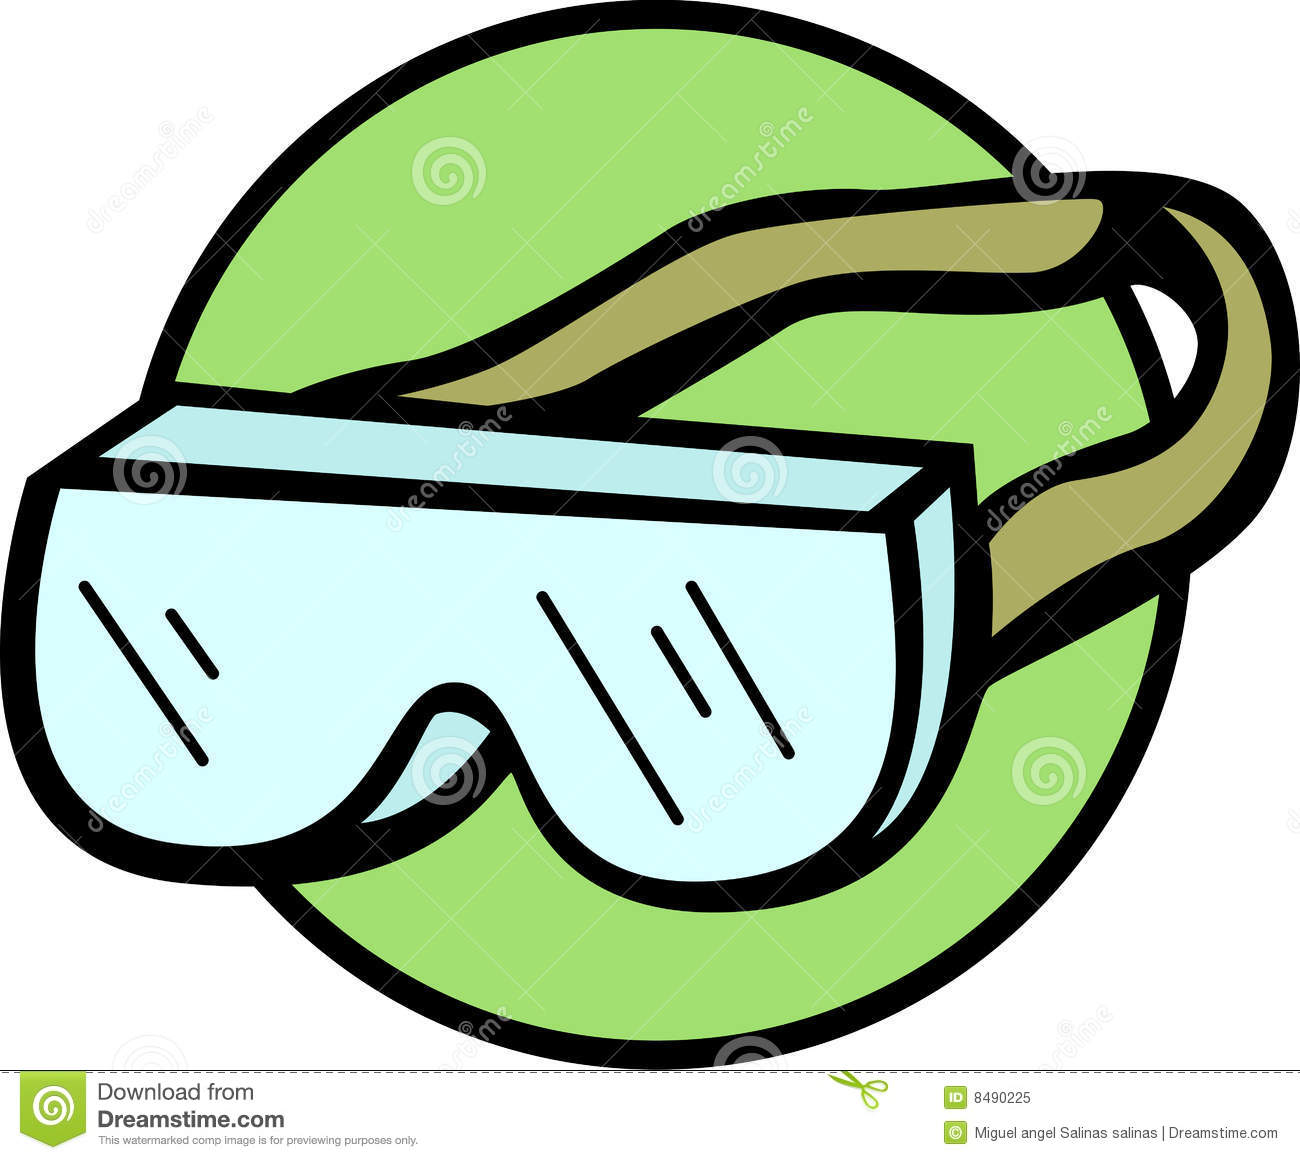 ... Safety Goggles - Hand-dra